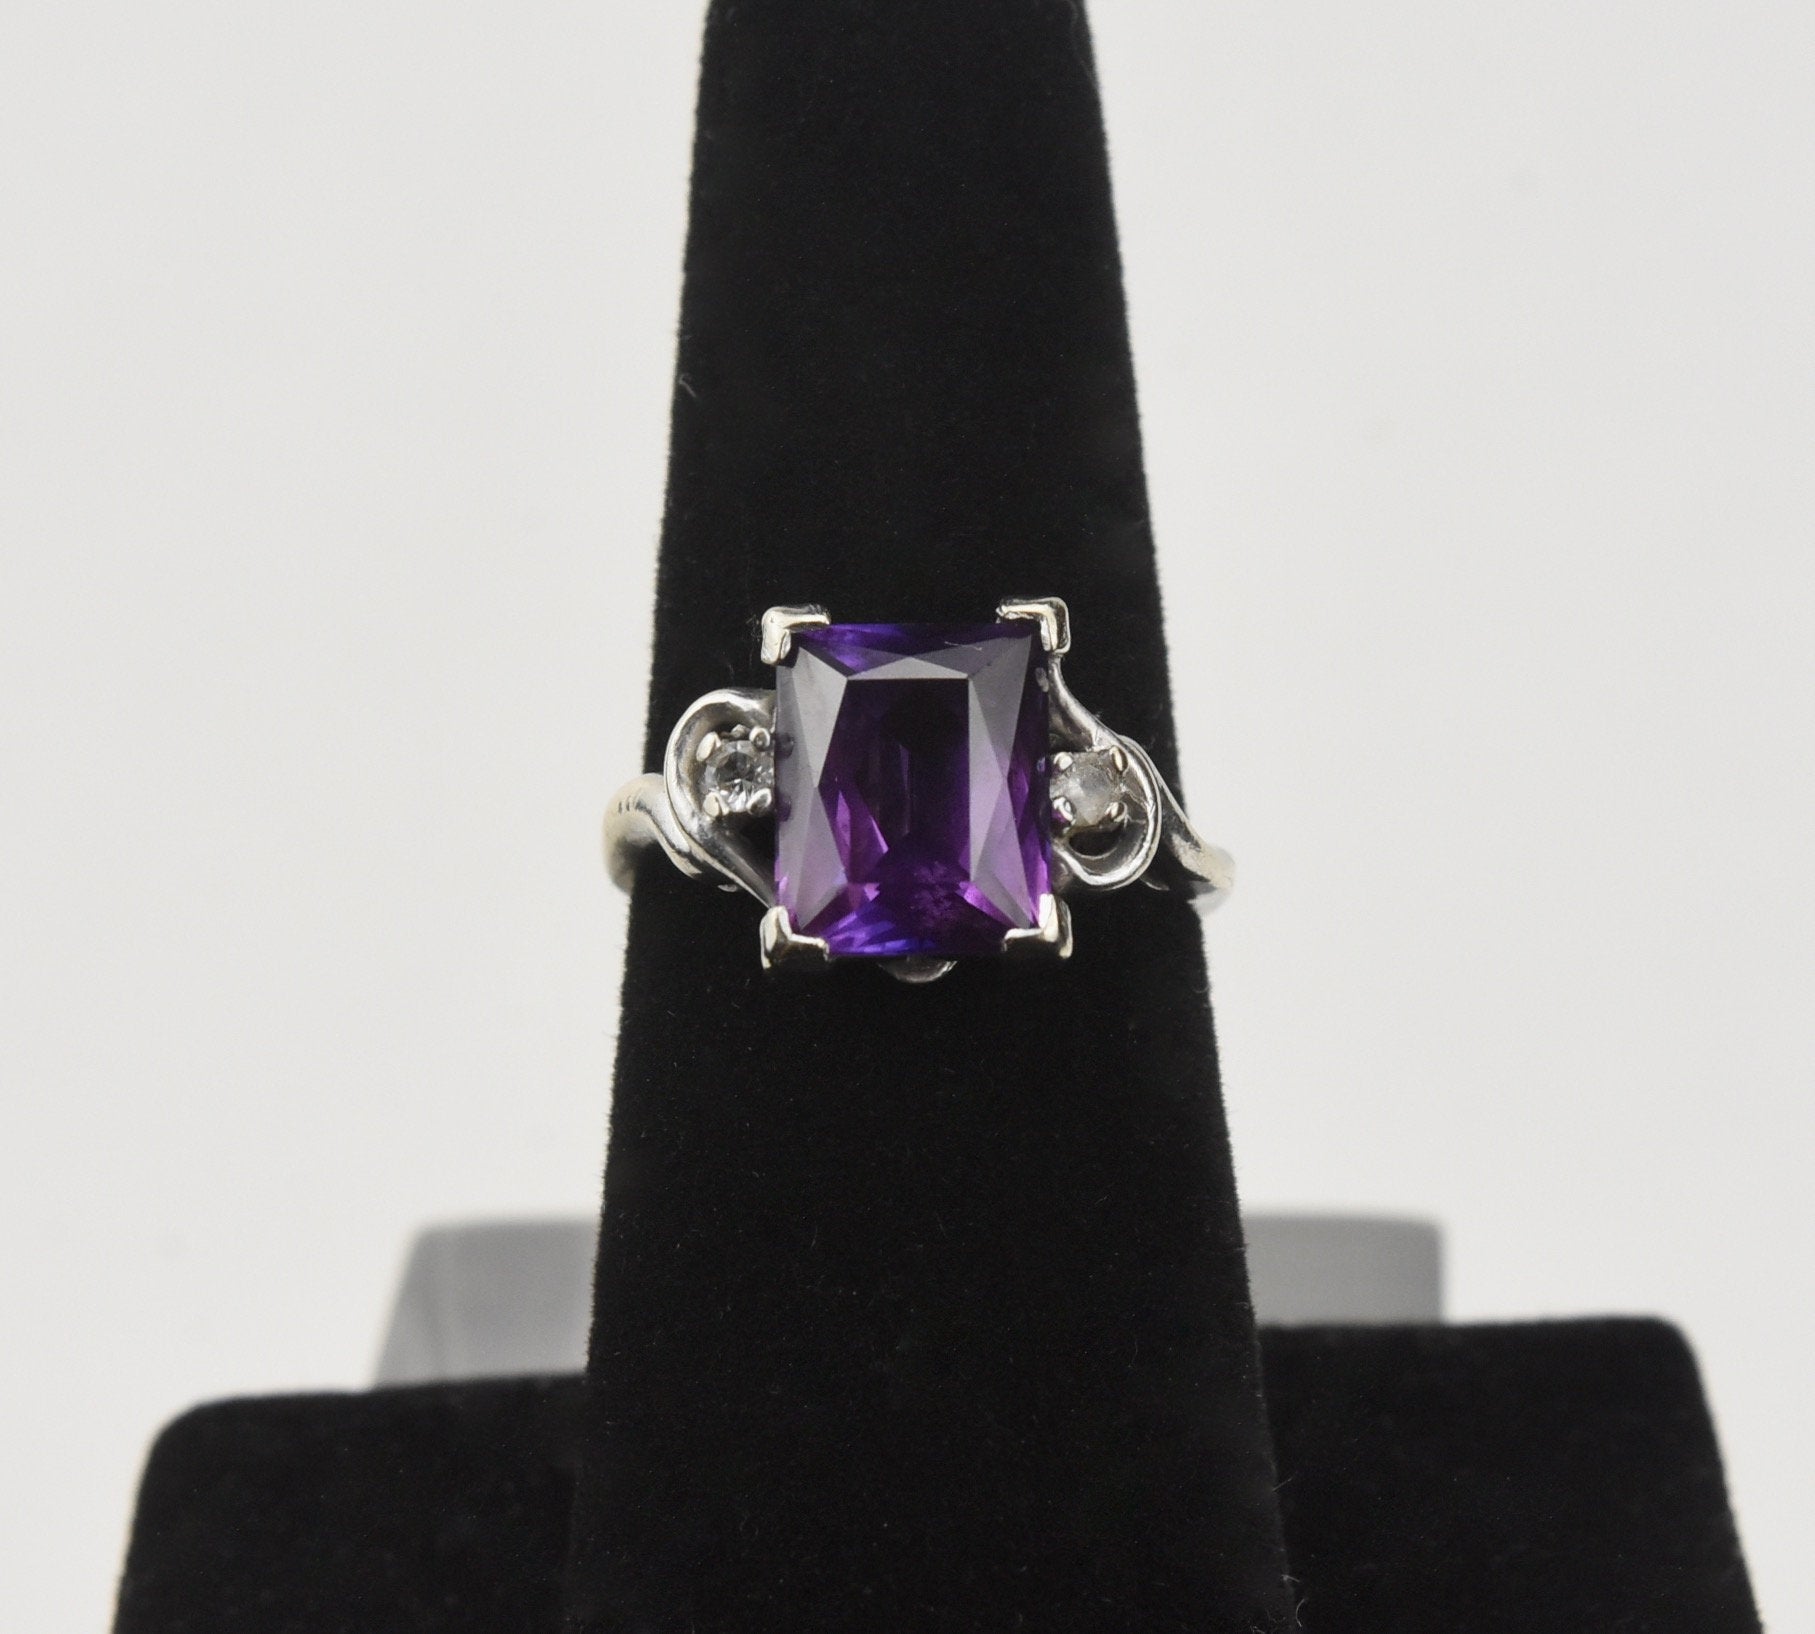 Silver Ring with Emerald Cut Purple Stone - Size 6.5